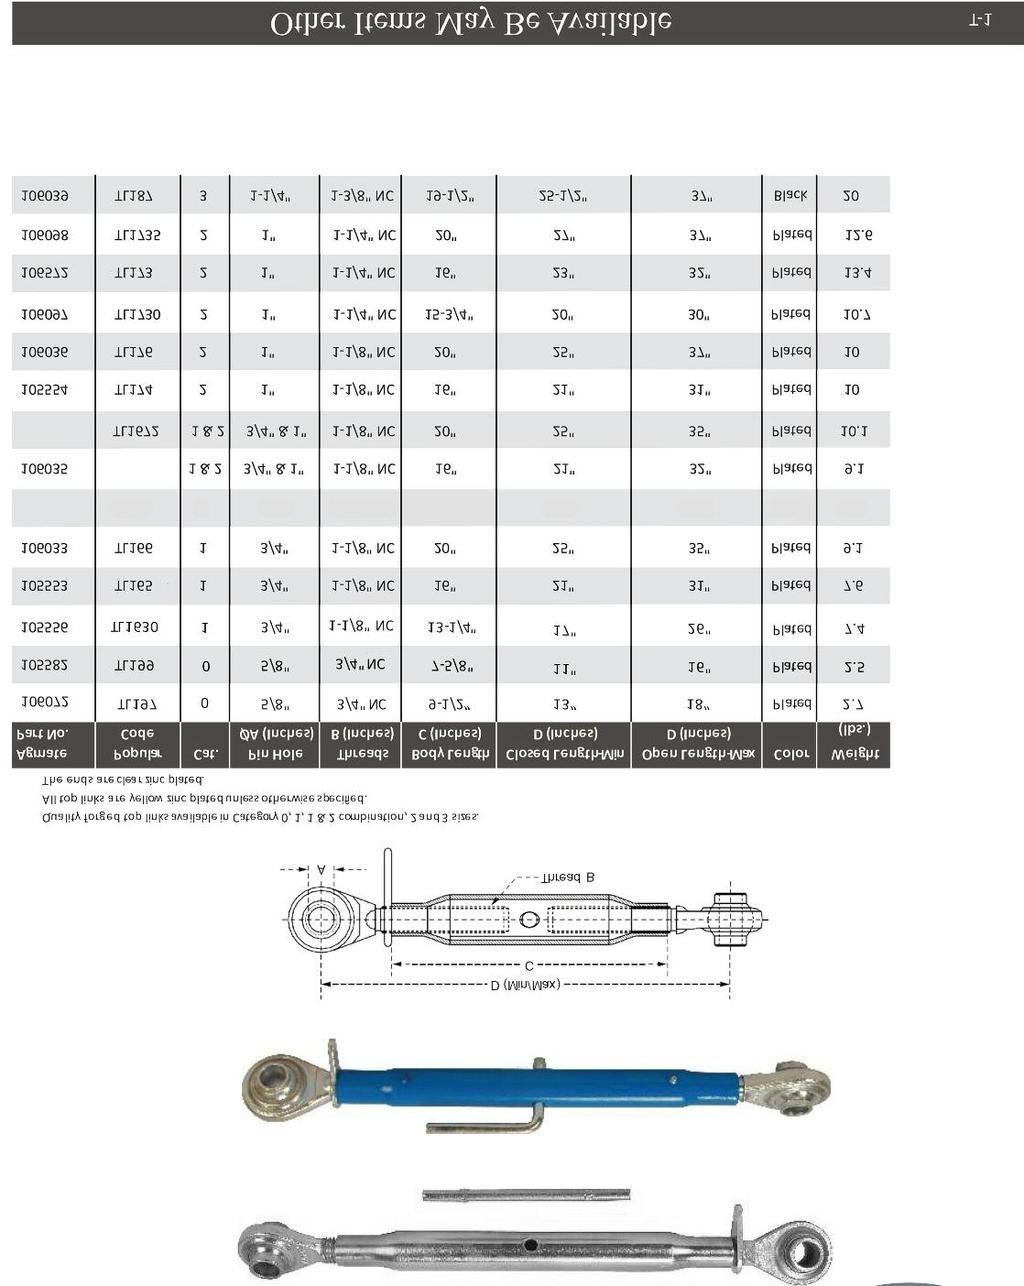 TOP LINK ASSEMBLY Quality forged top links available in Category 0, 1, 1 & 2